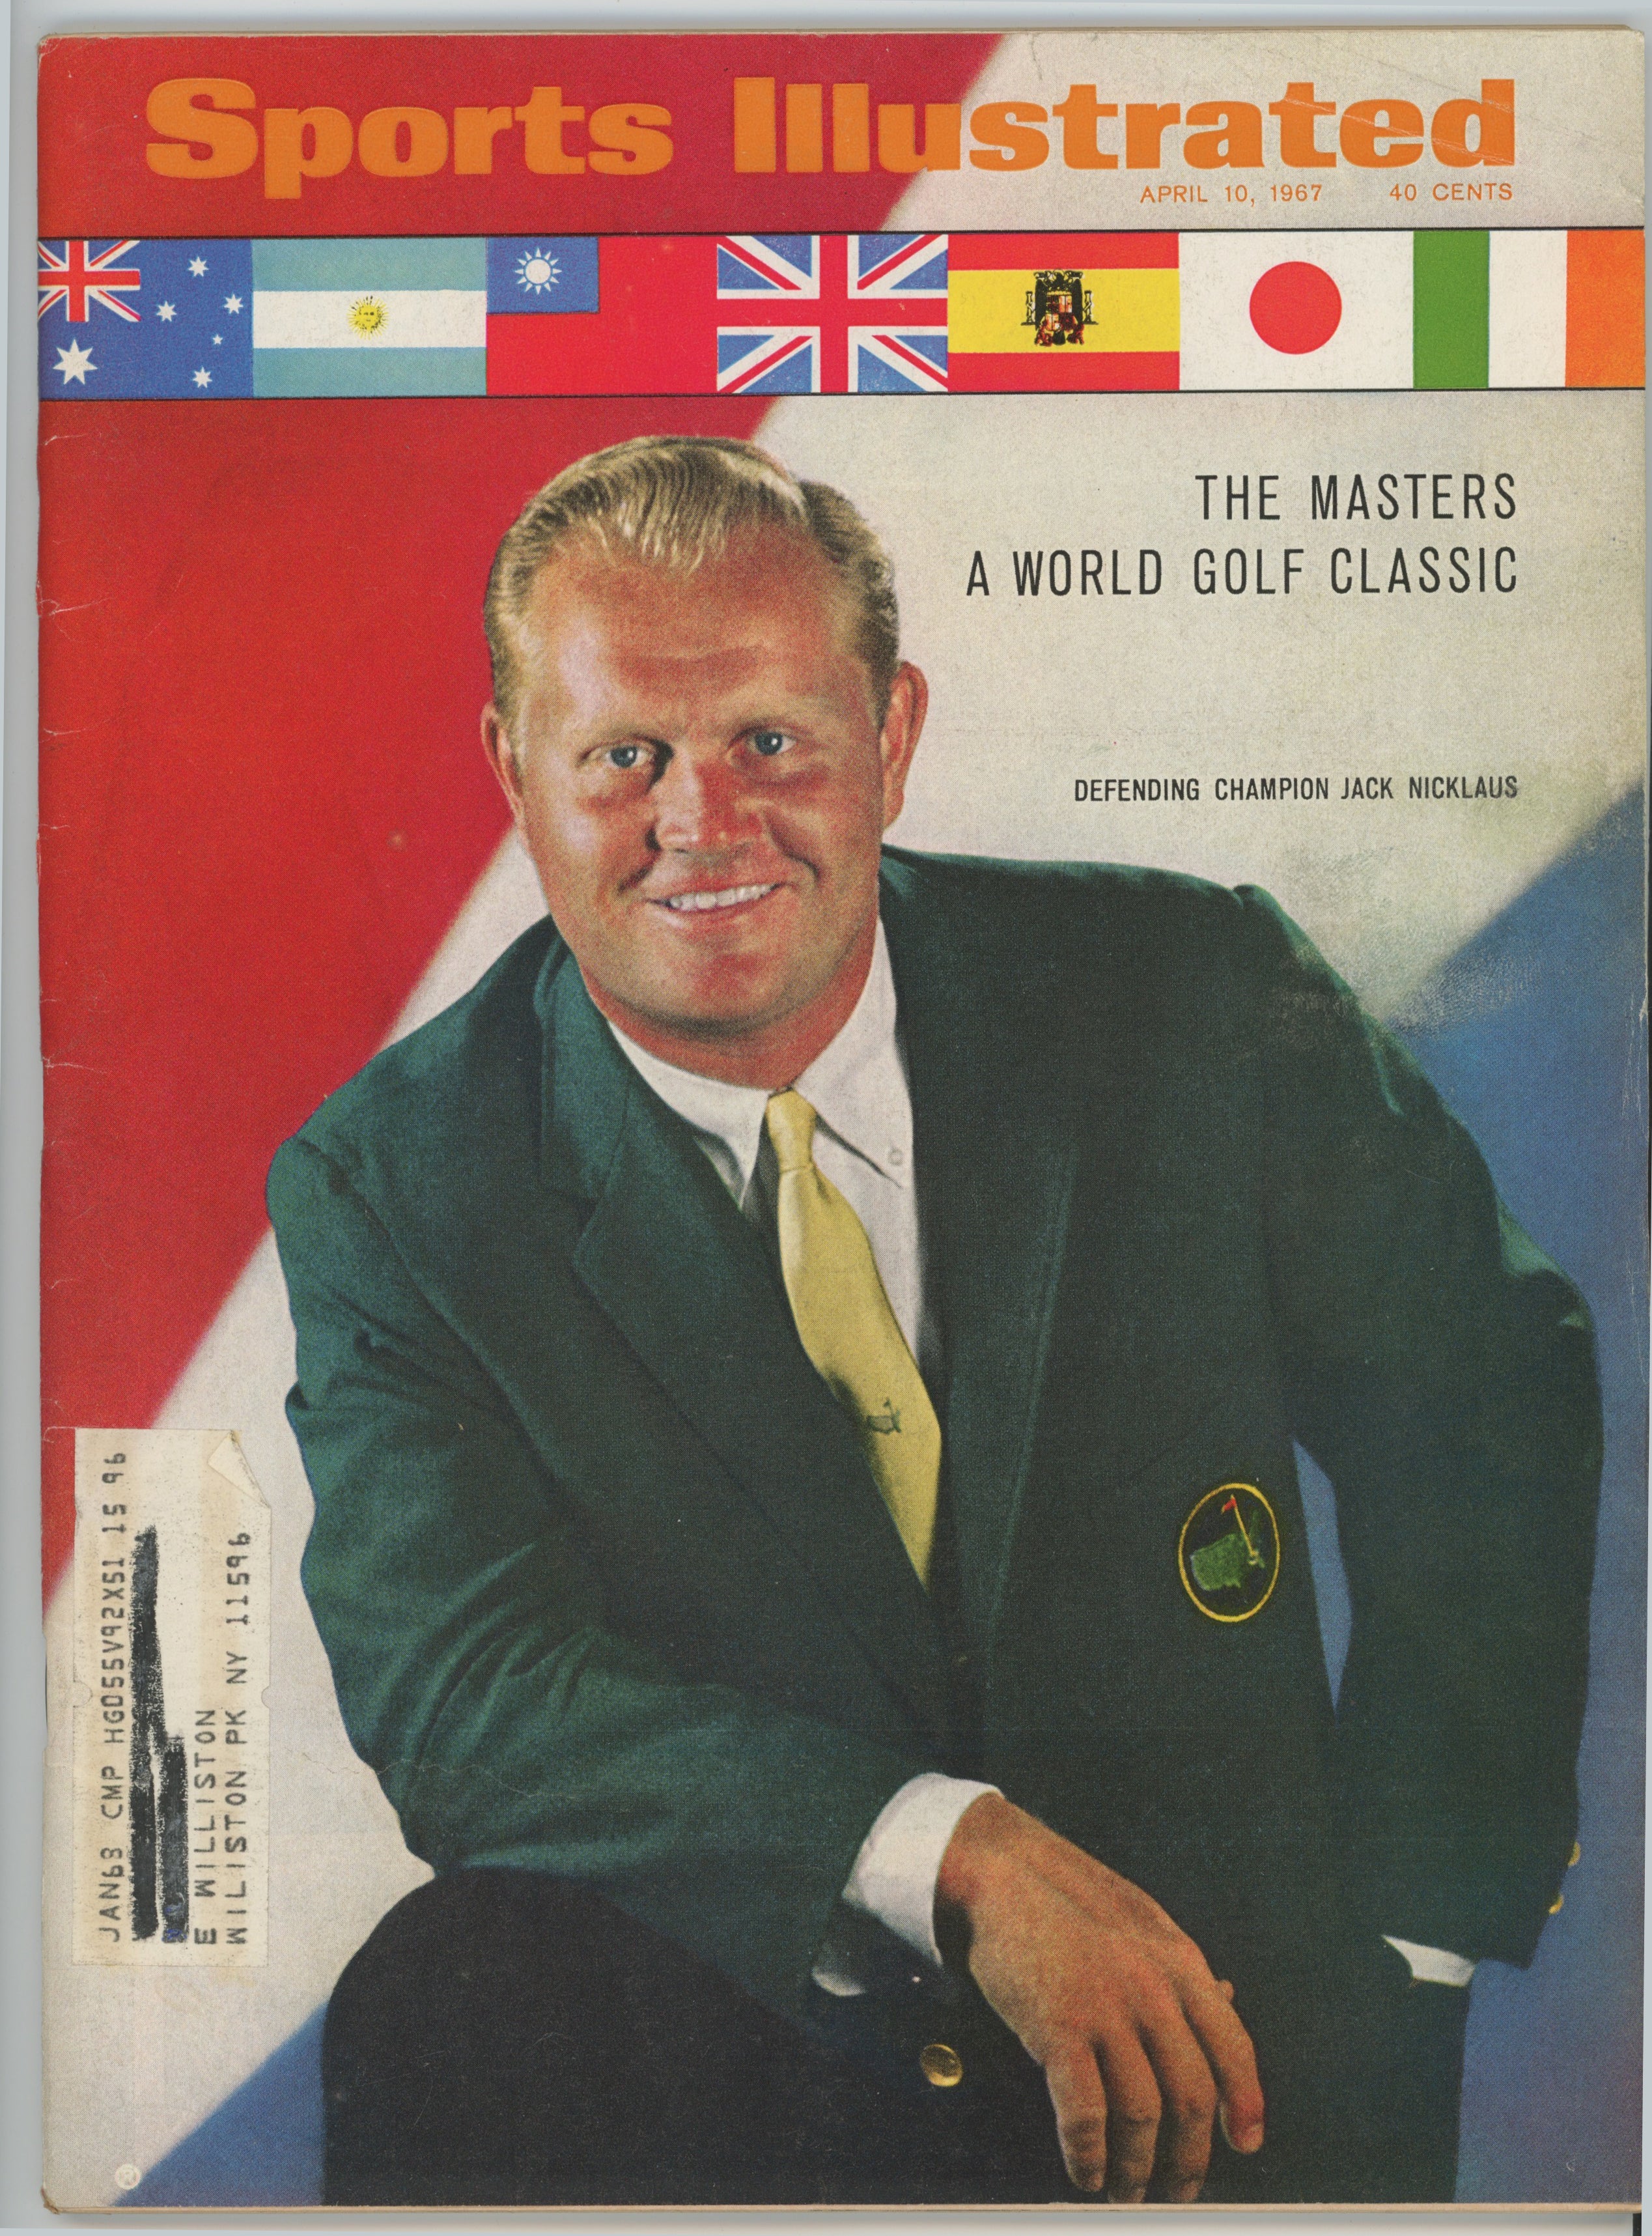 Jack Nicklaus “The Masters A World Golf Classic” 4/10/67 EX ML